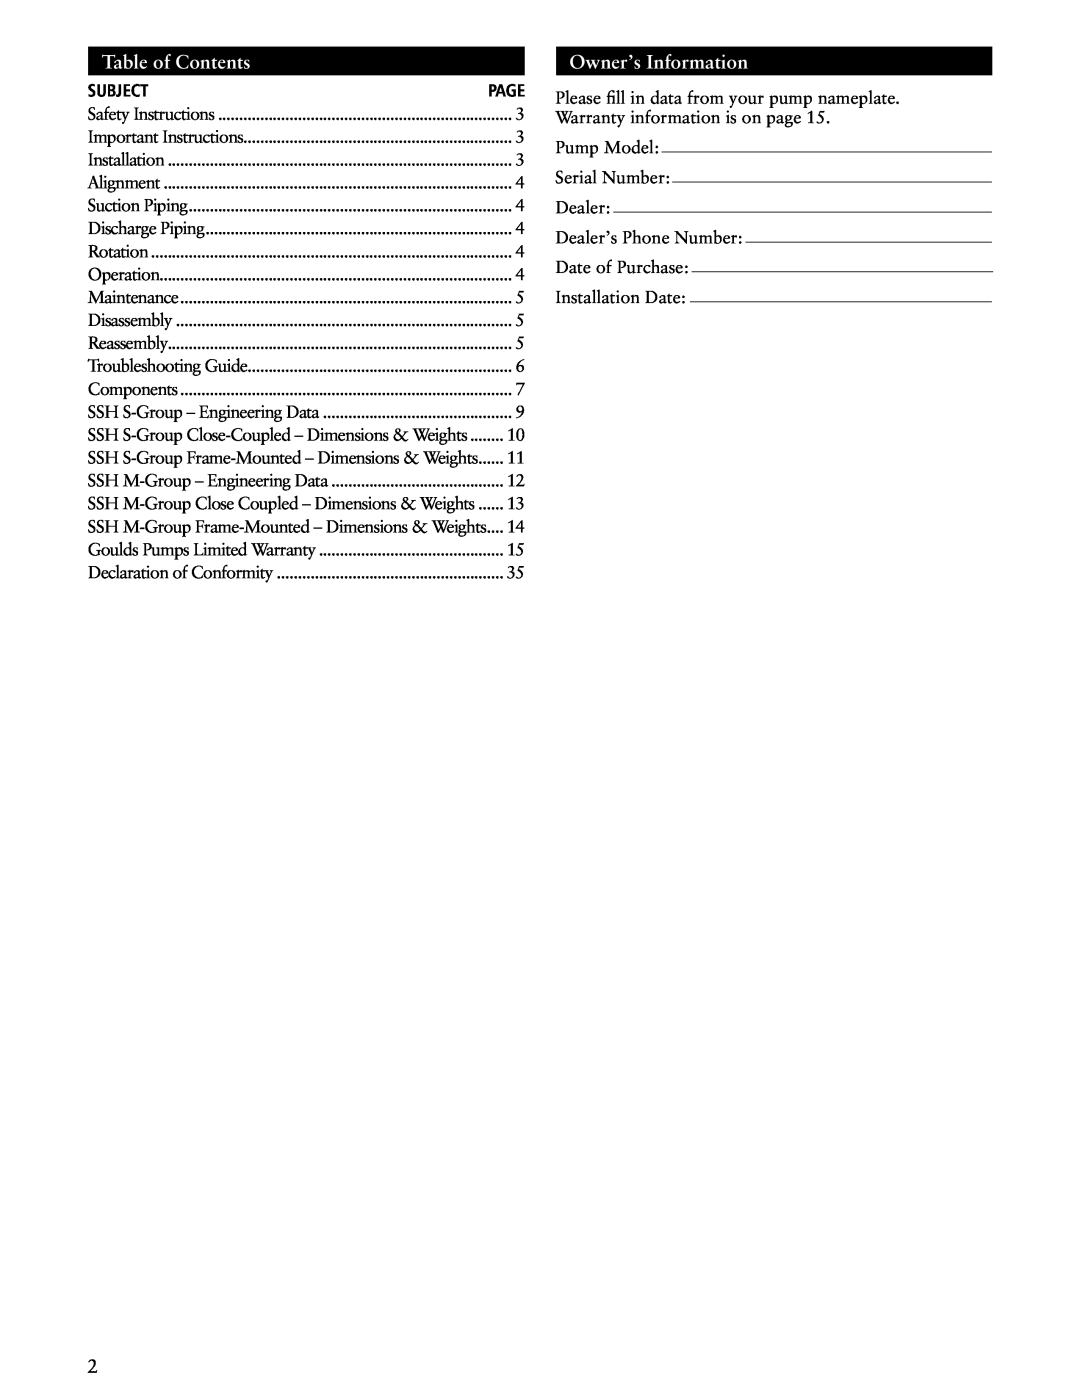 ITT SSH-F, SSH-C manual Table of Contents, Owner’s Information, Subject 